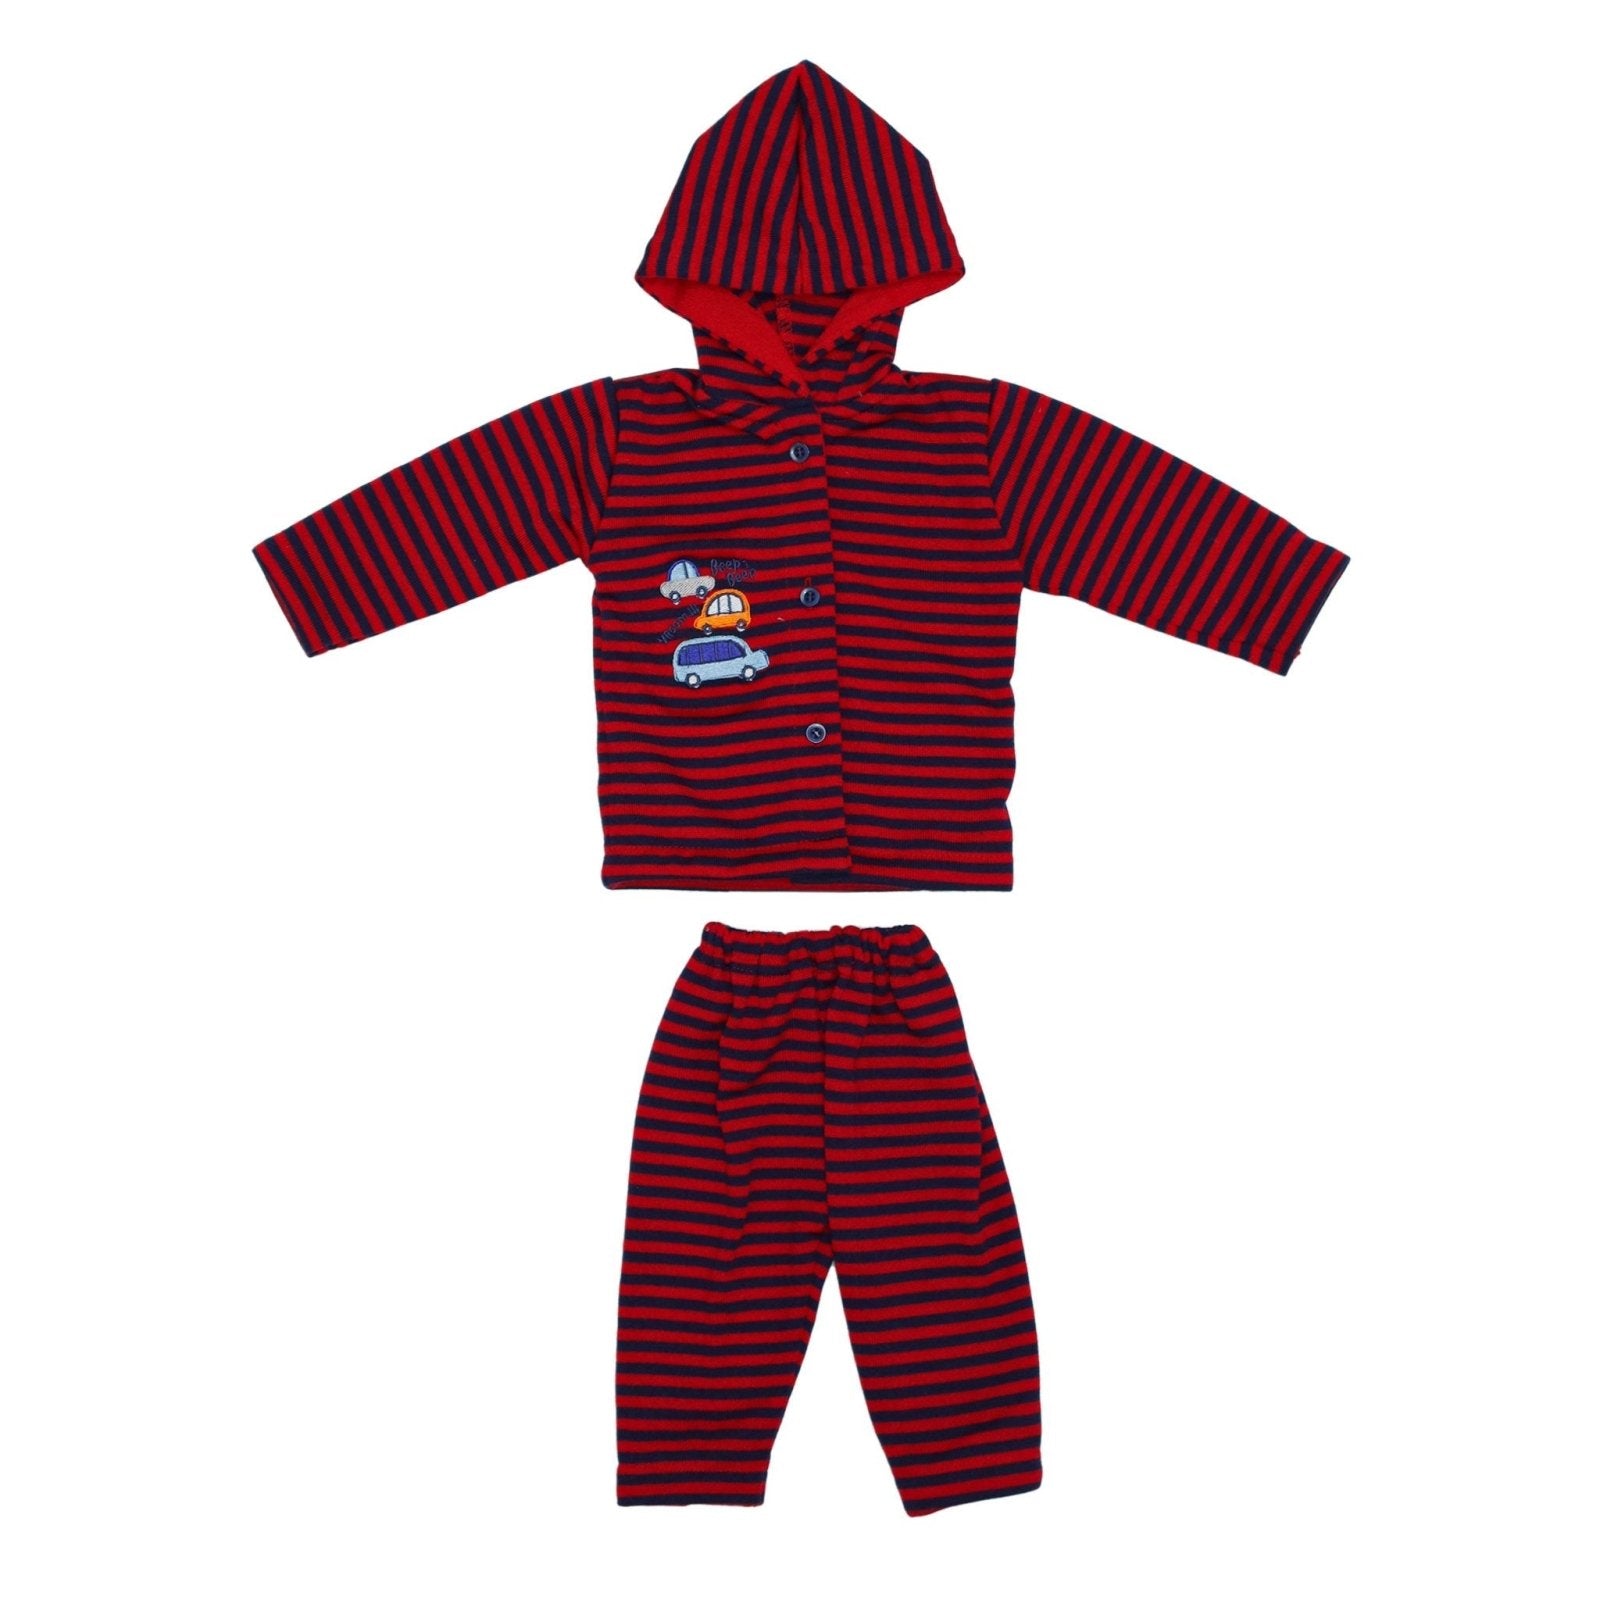 Baby Hooded Woolen Suit Red Stripes by Little Darling